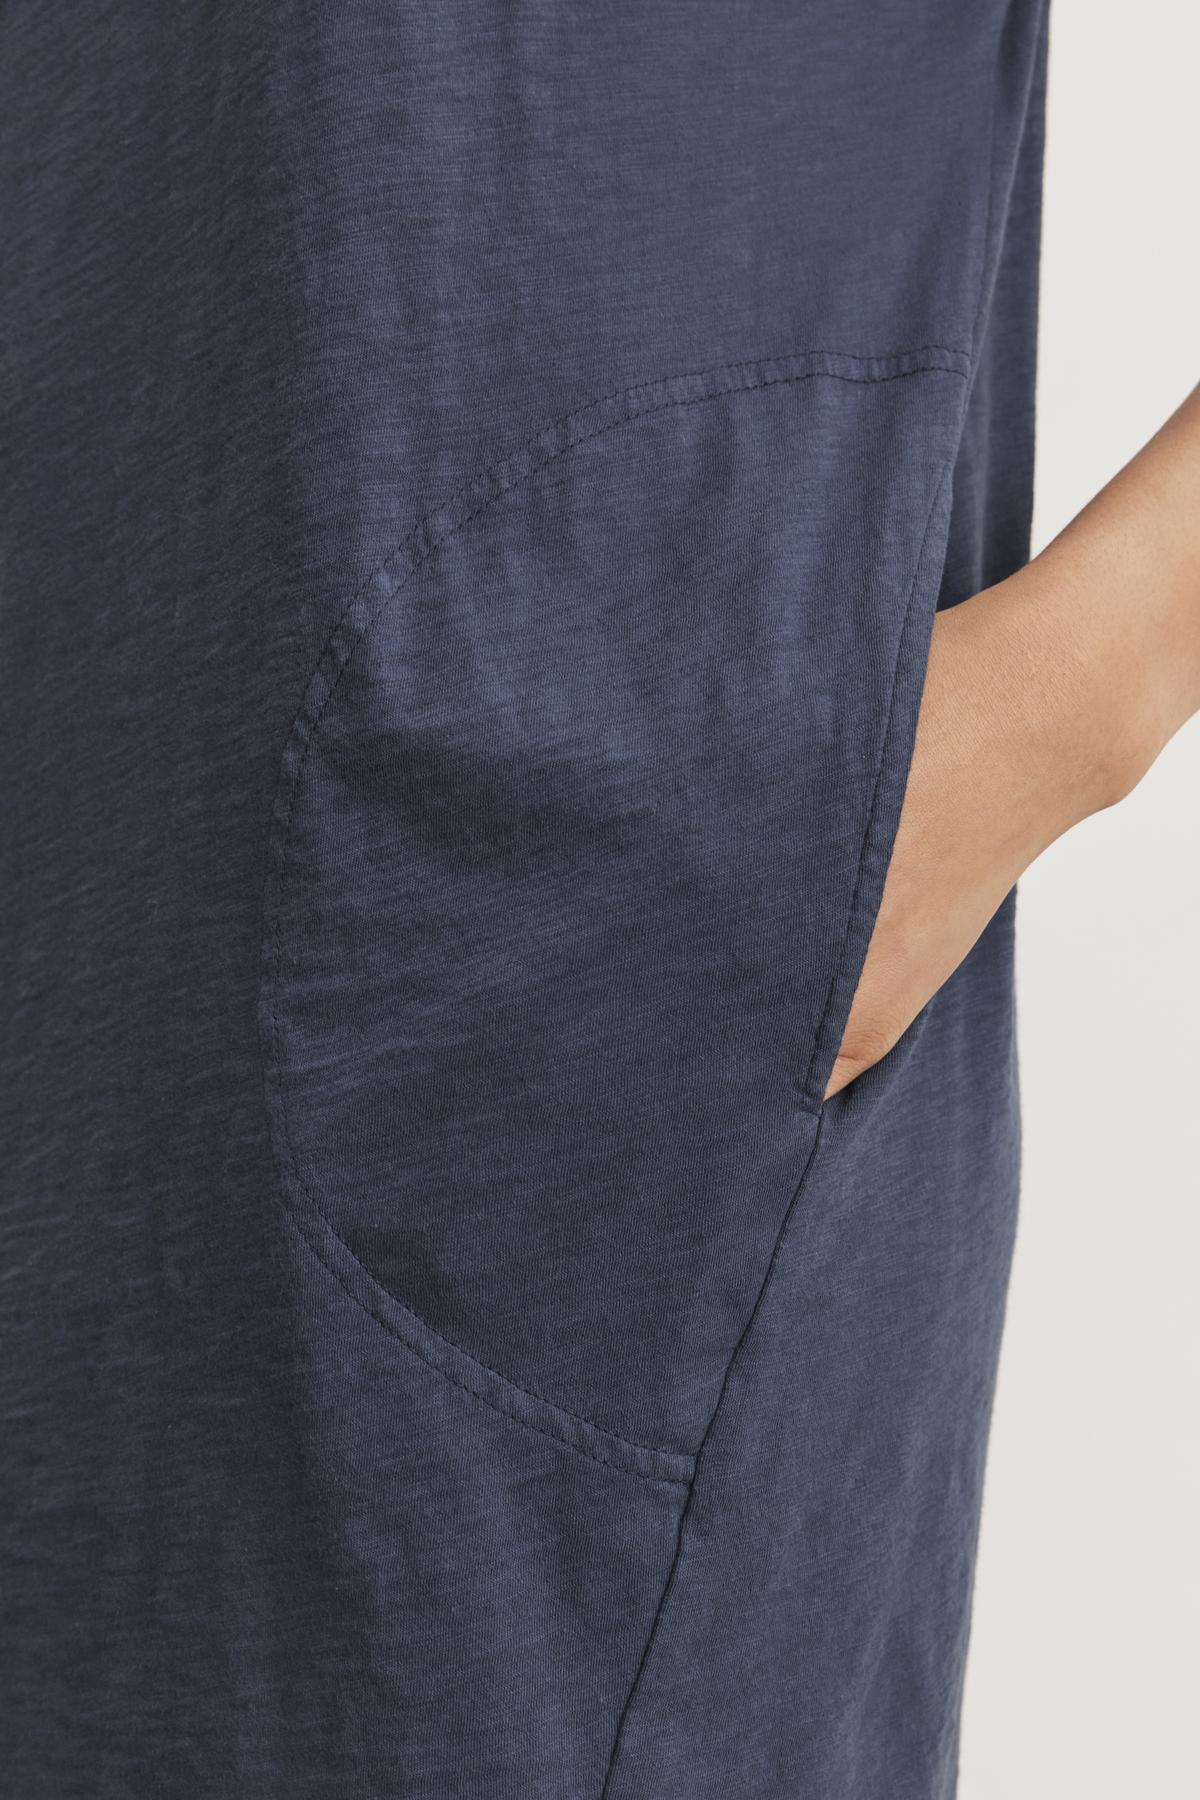 Close-up of a person’s hand resting in the pocket of an ATHENA DRESS by Velvet by Graham & Spencer, highlighting the relaxed fit and soft cotton slub fabric.-37606520324289